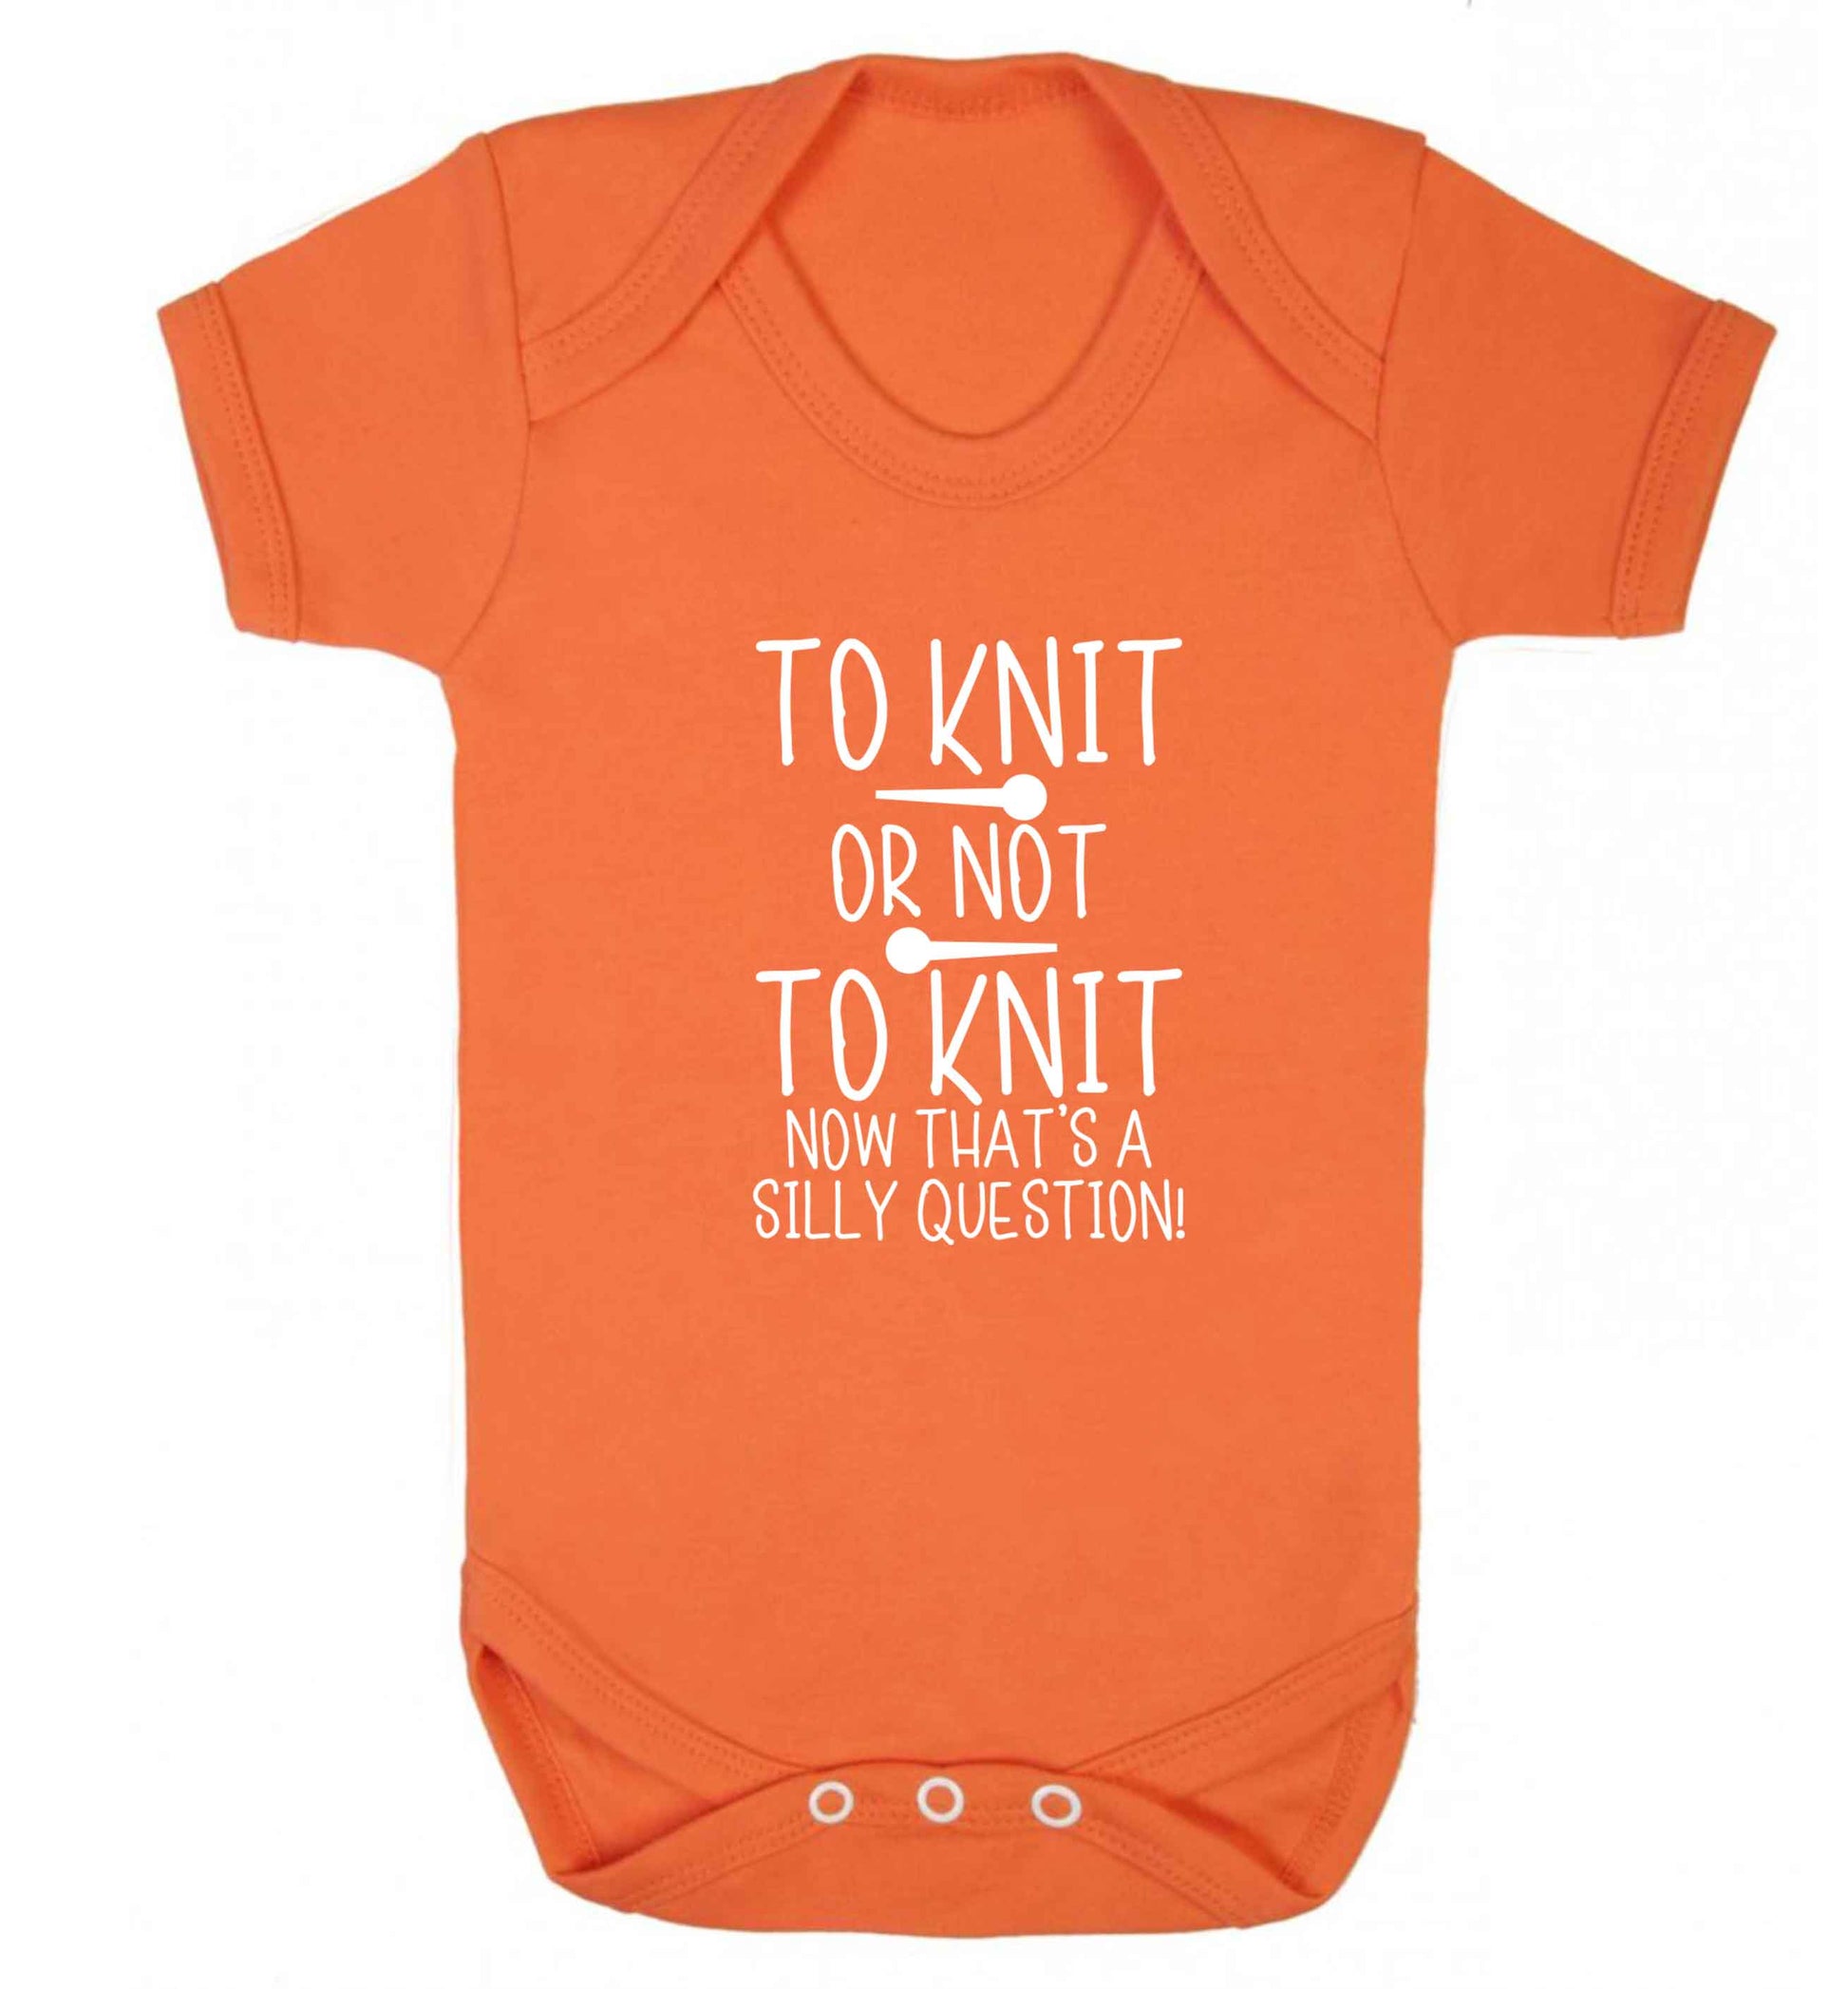 To knit or not to knit now that's a silly question baby vest orange 18-24 months